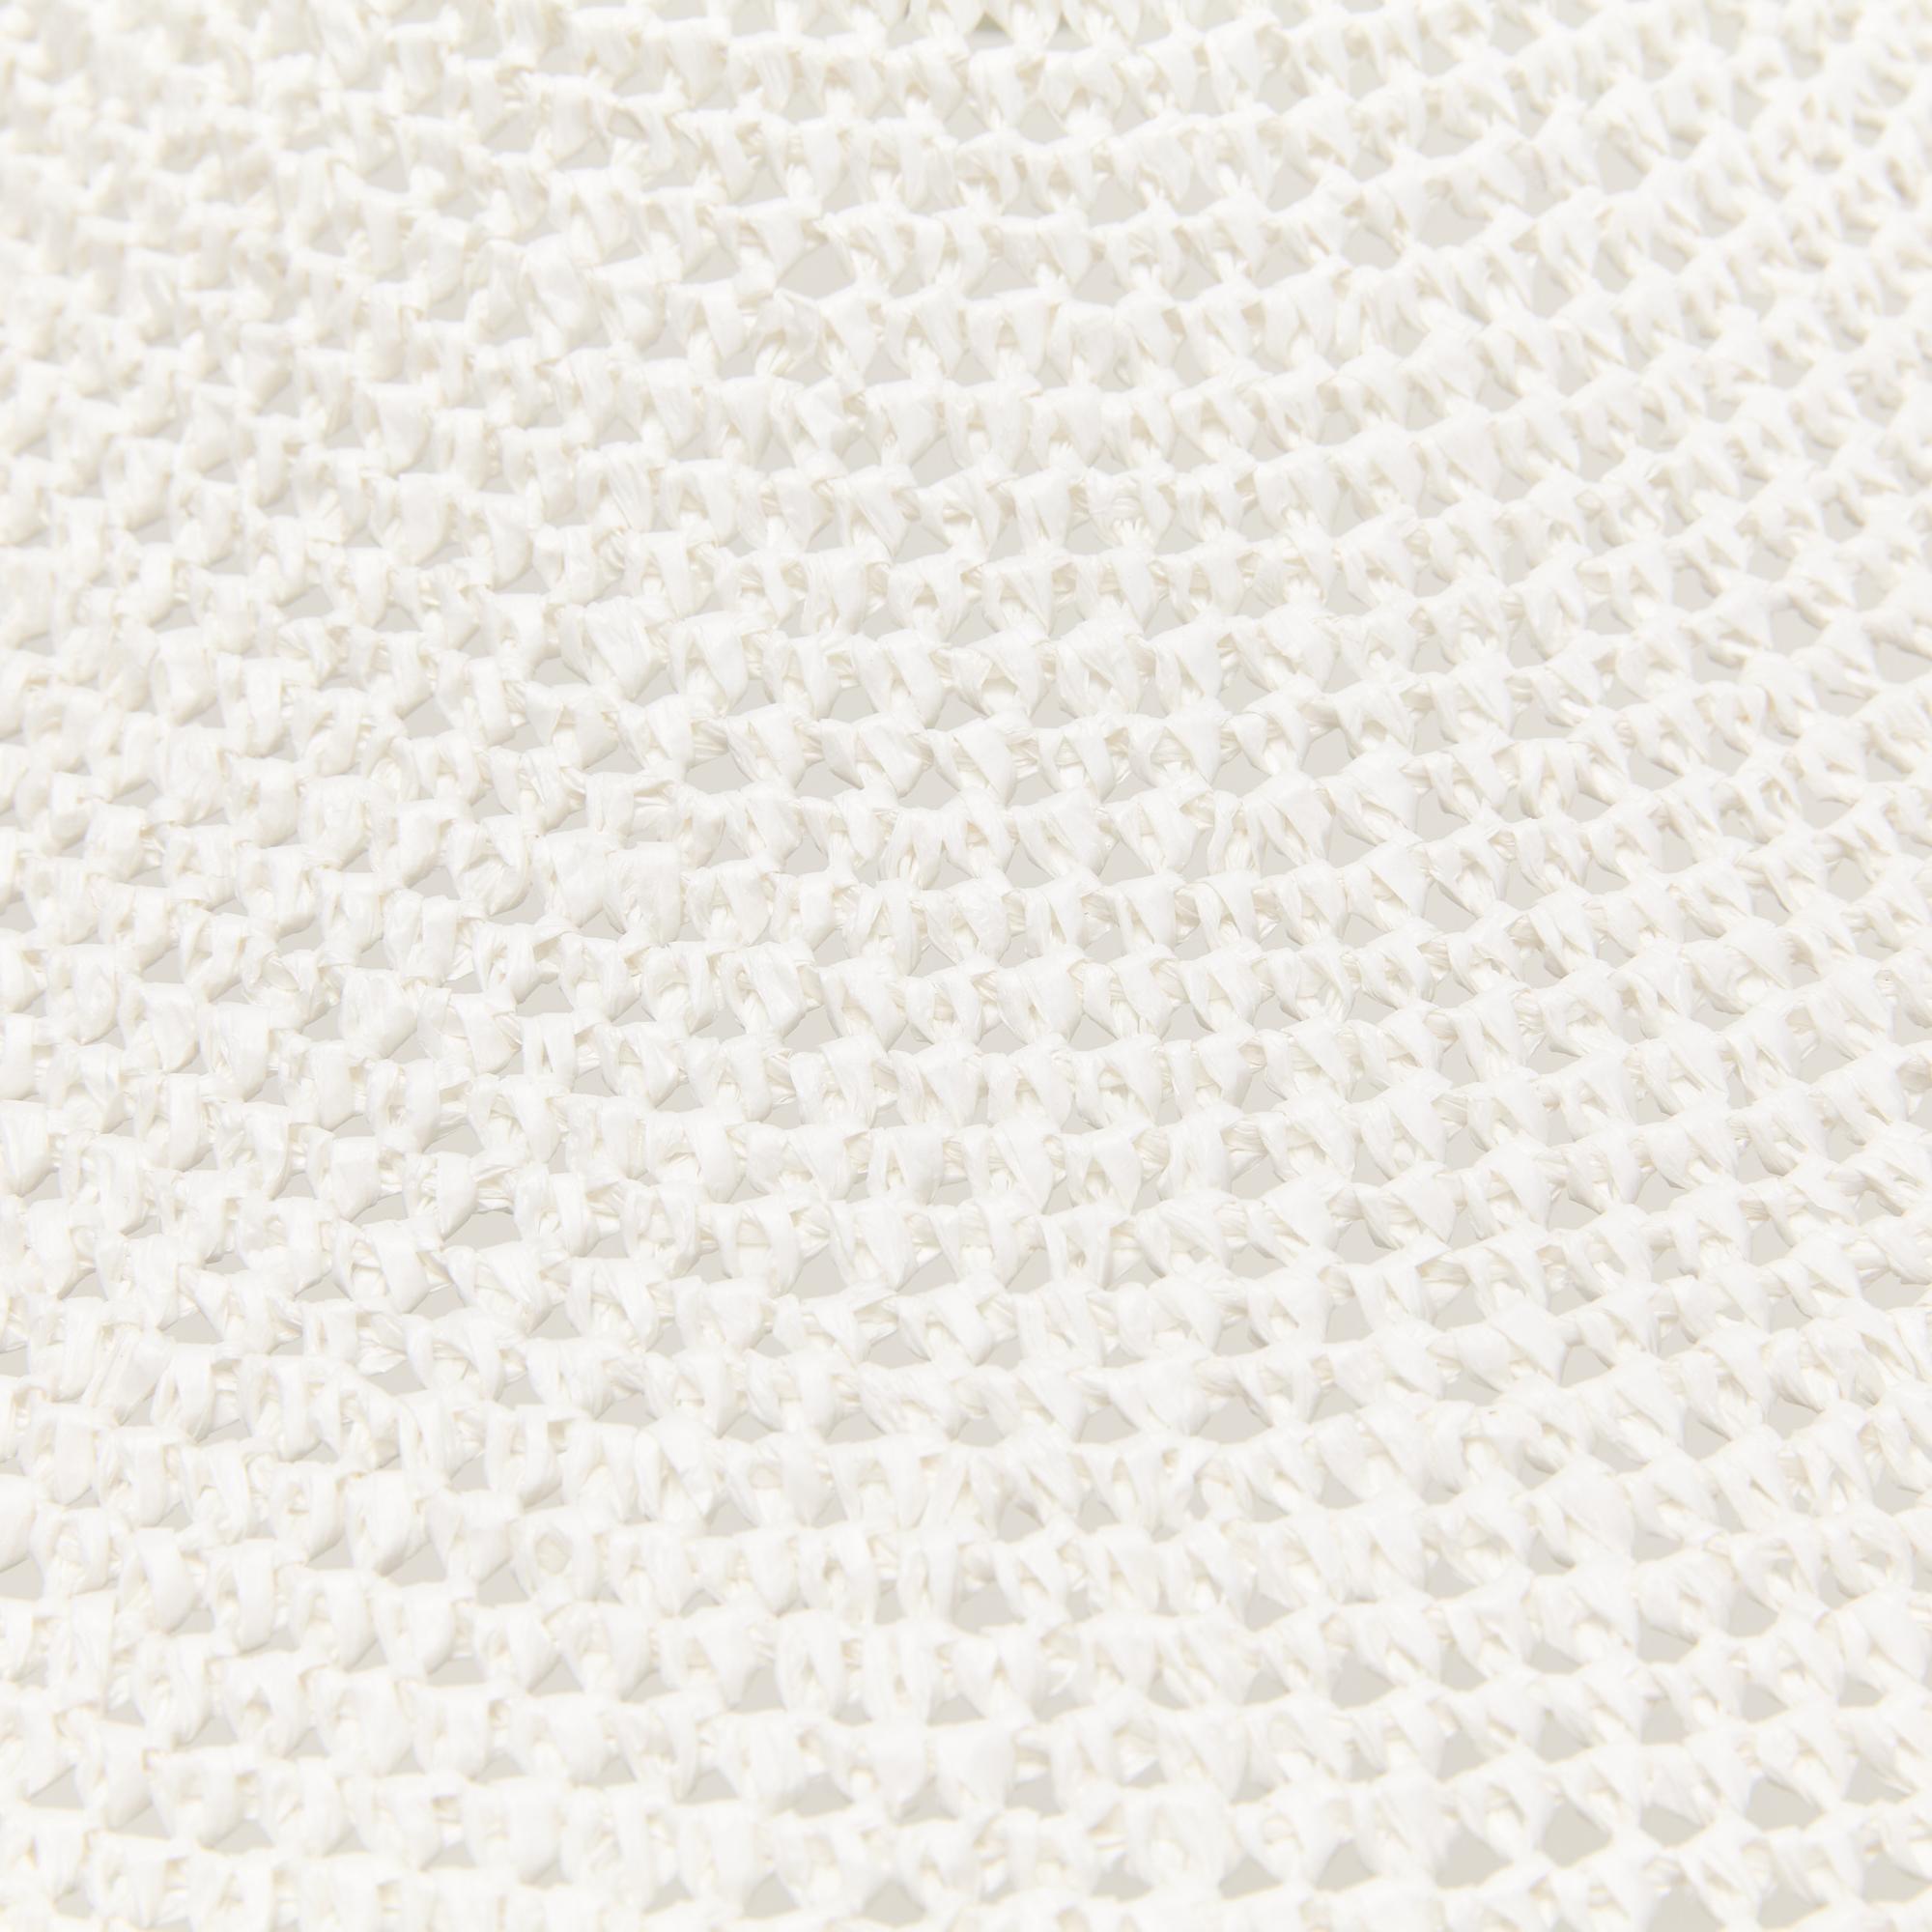 British SOLITAIRE 03 Pendant Light Ø100cm/39.4in, Hand Crocheted in Egyptian Cotton For Sale